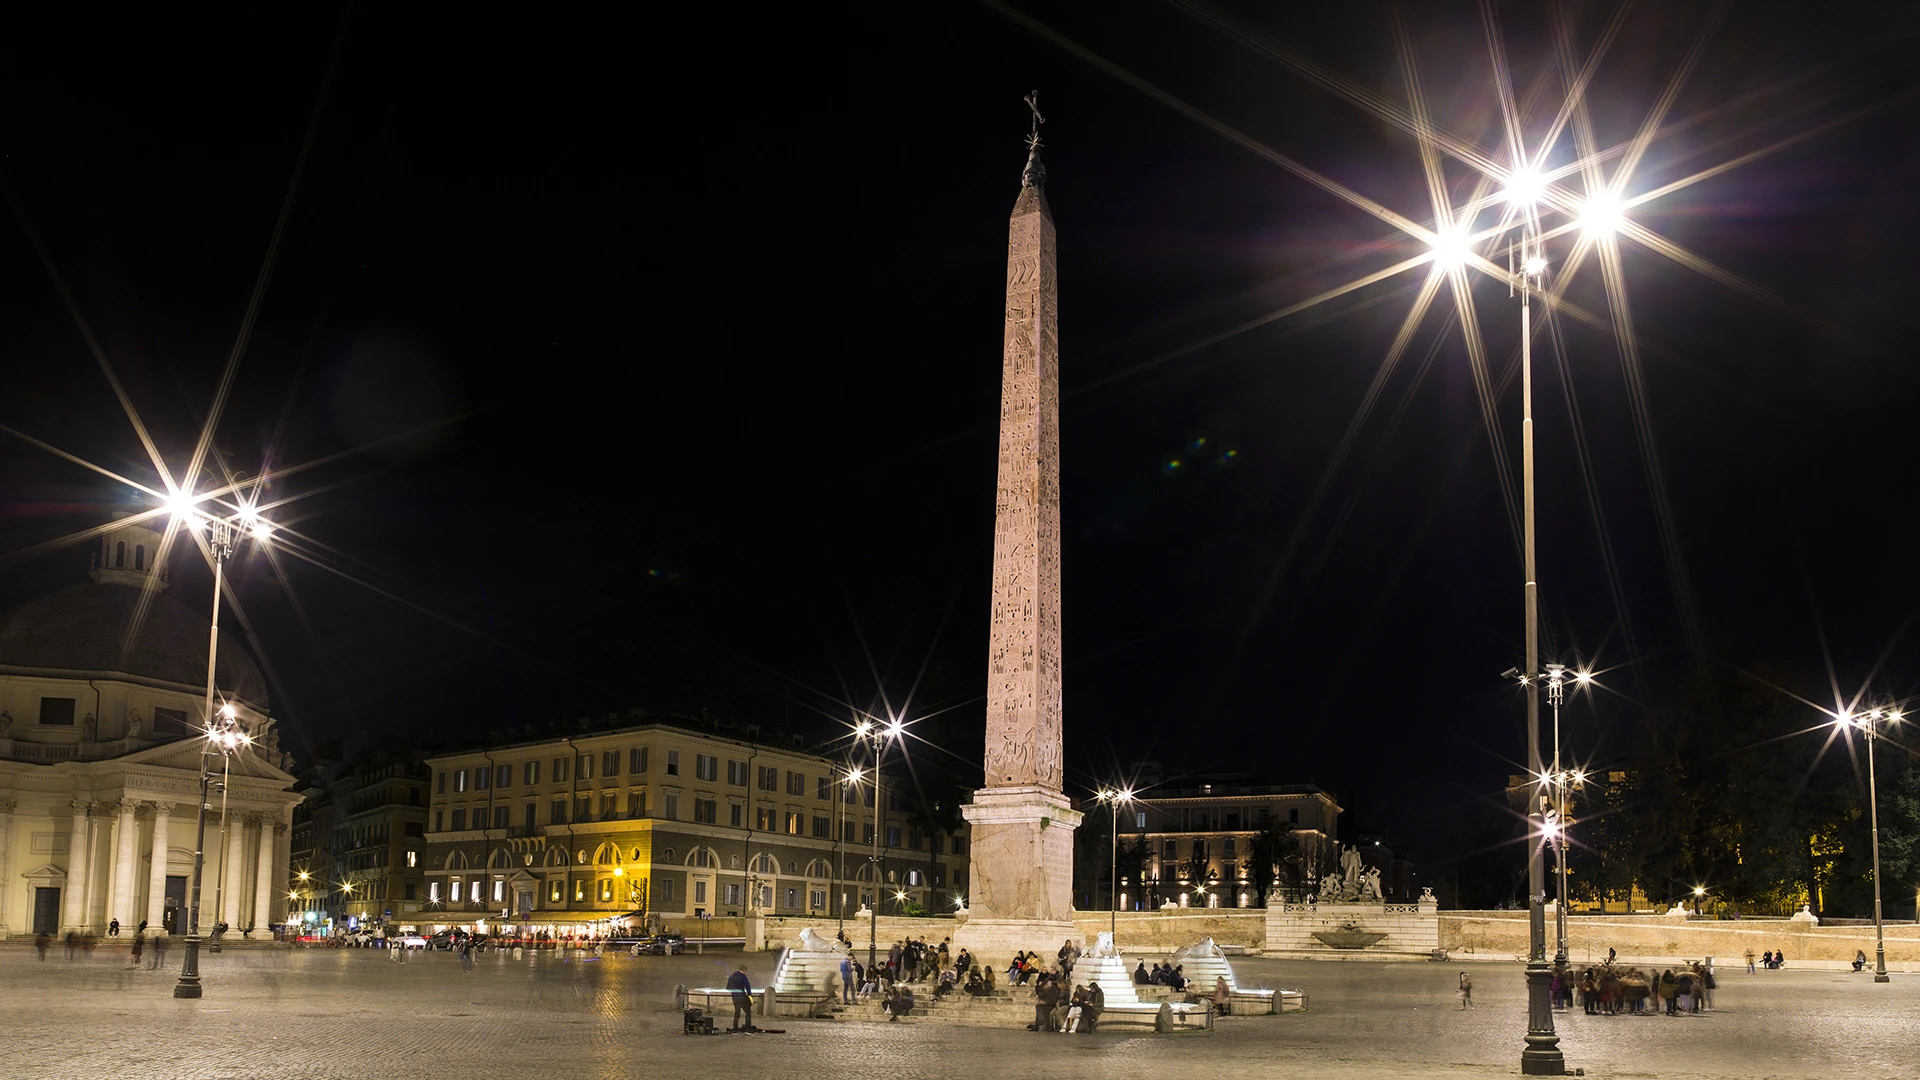 An image of Piazza del Popolo, featuring the lights involved in the Acea project “Ai nati oggi”